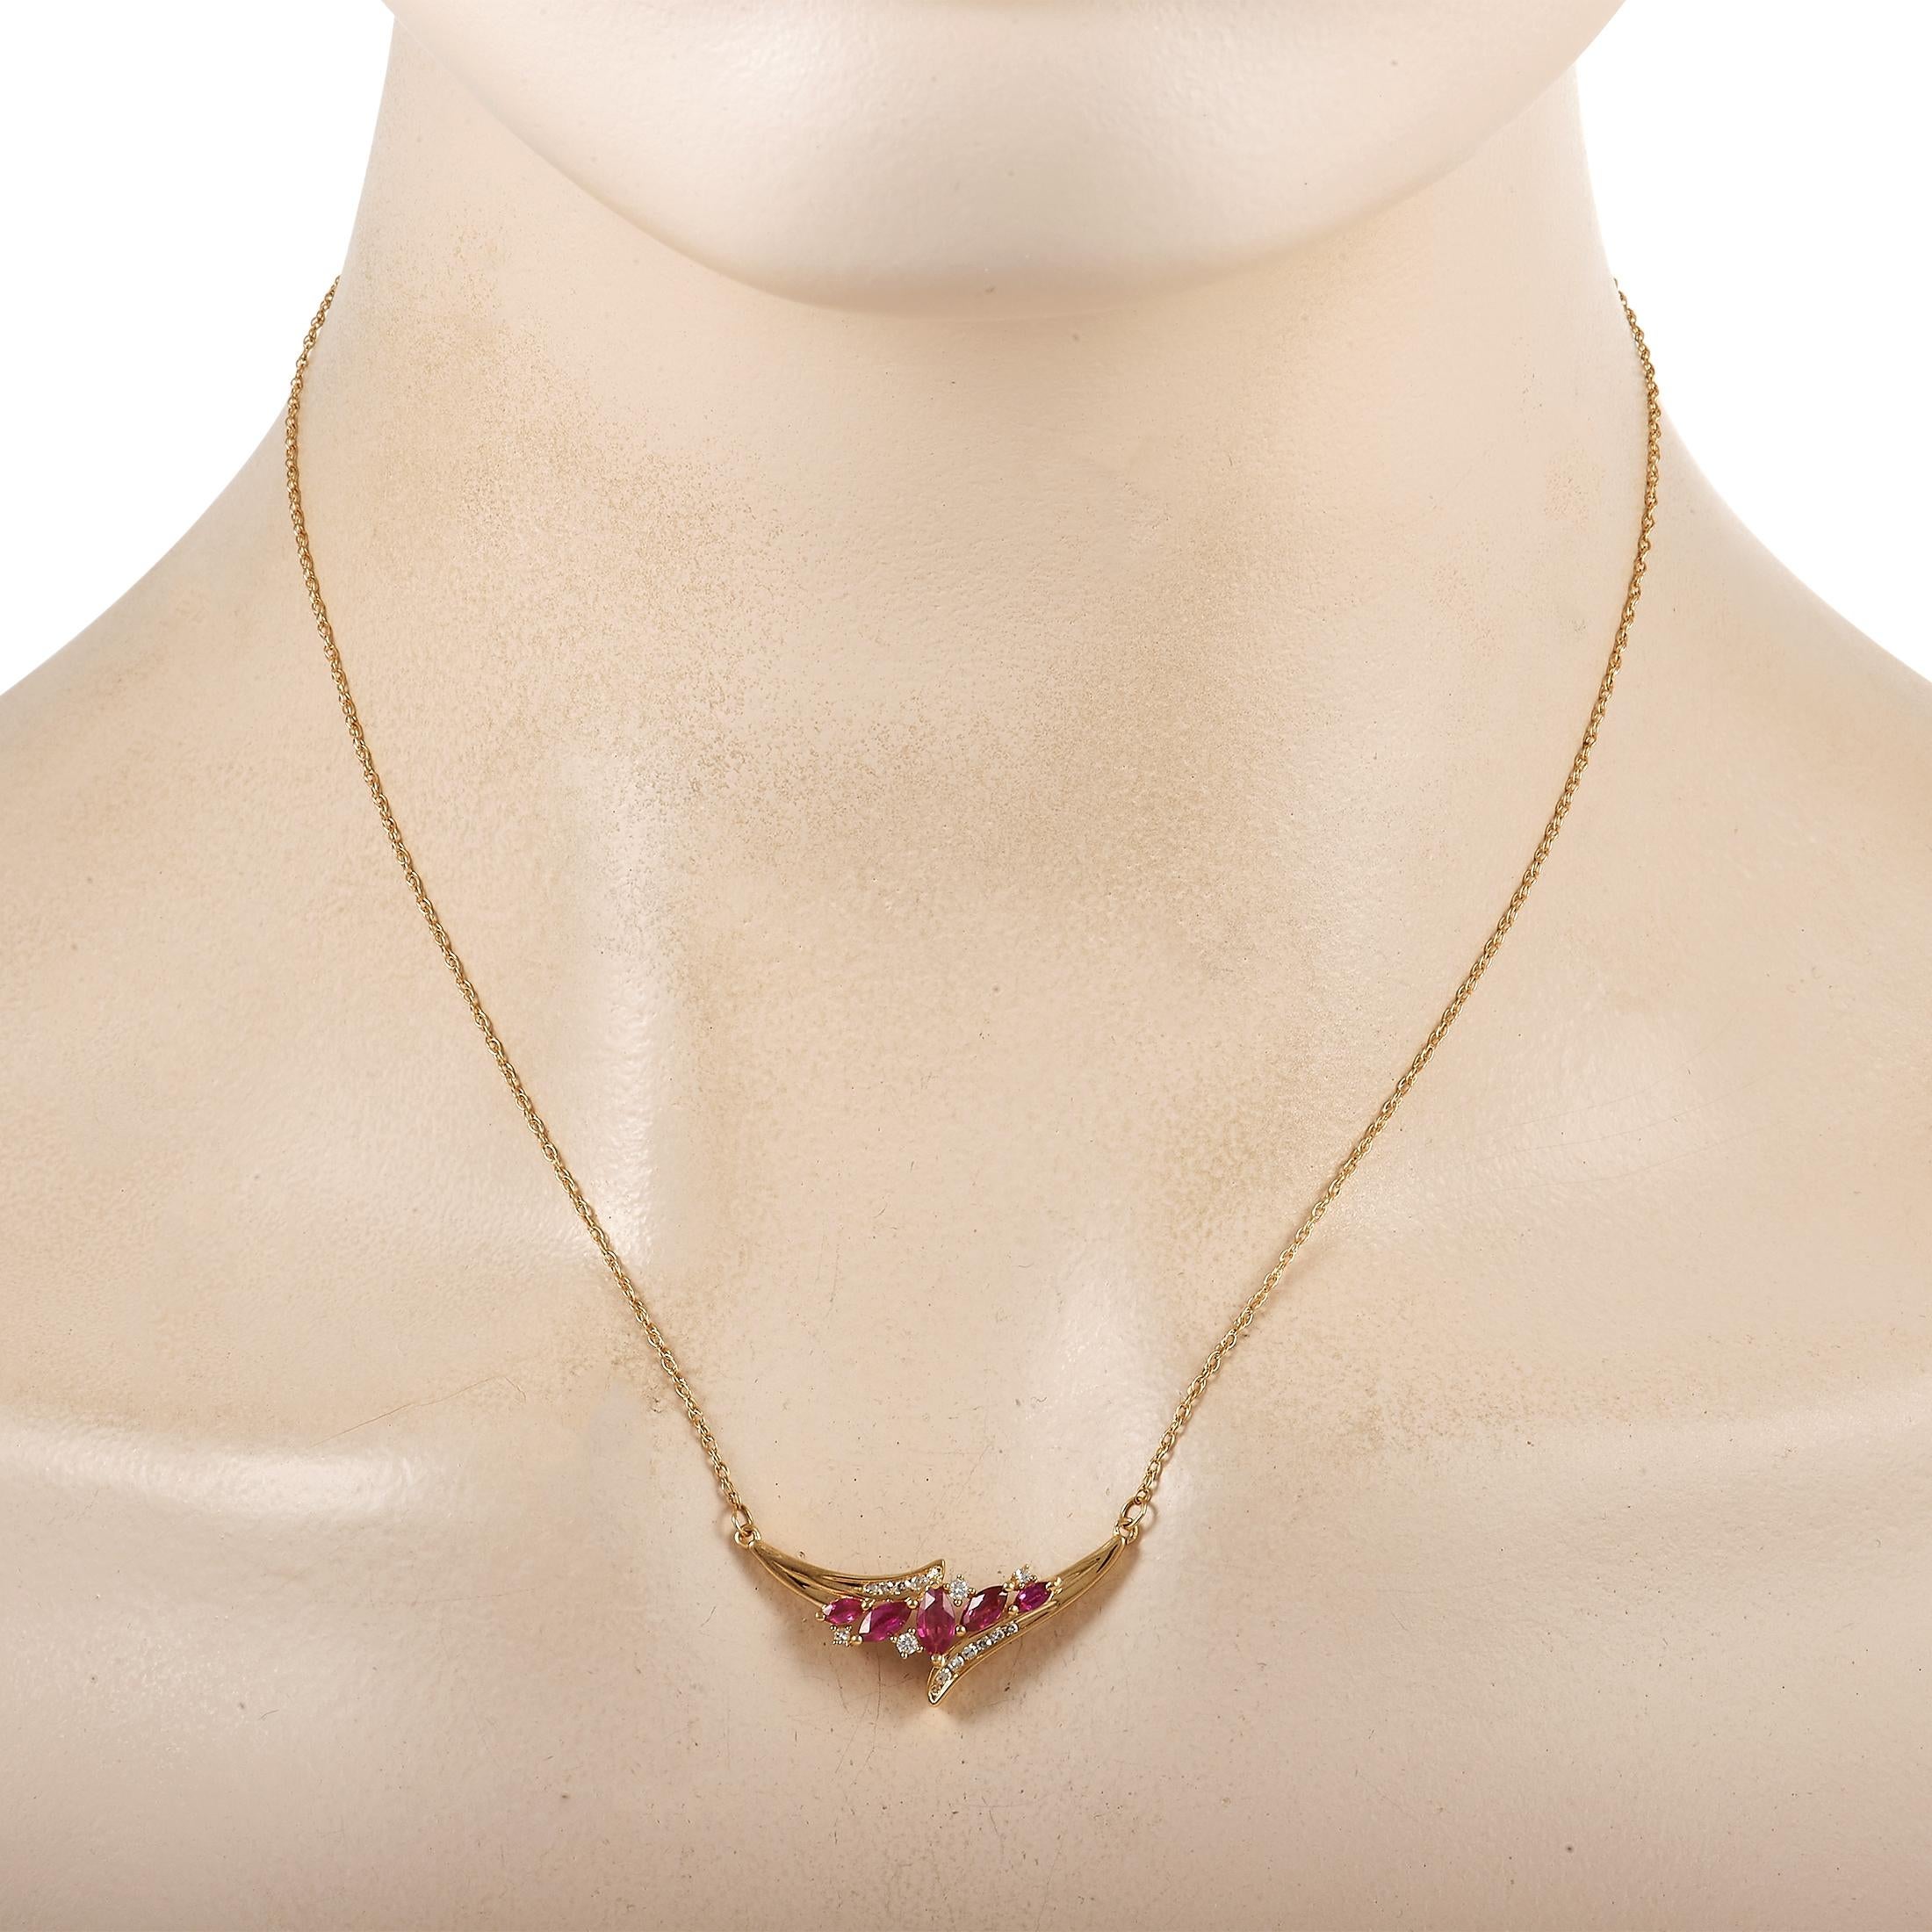 This elegant LB Exclusive necklace is made with 14K yellow gold and features a chain measuring 16 inches in length. The matching 14K yellow gold pendant is set with five beautiful rubies. The rubies are accented with a number of round diamonds